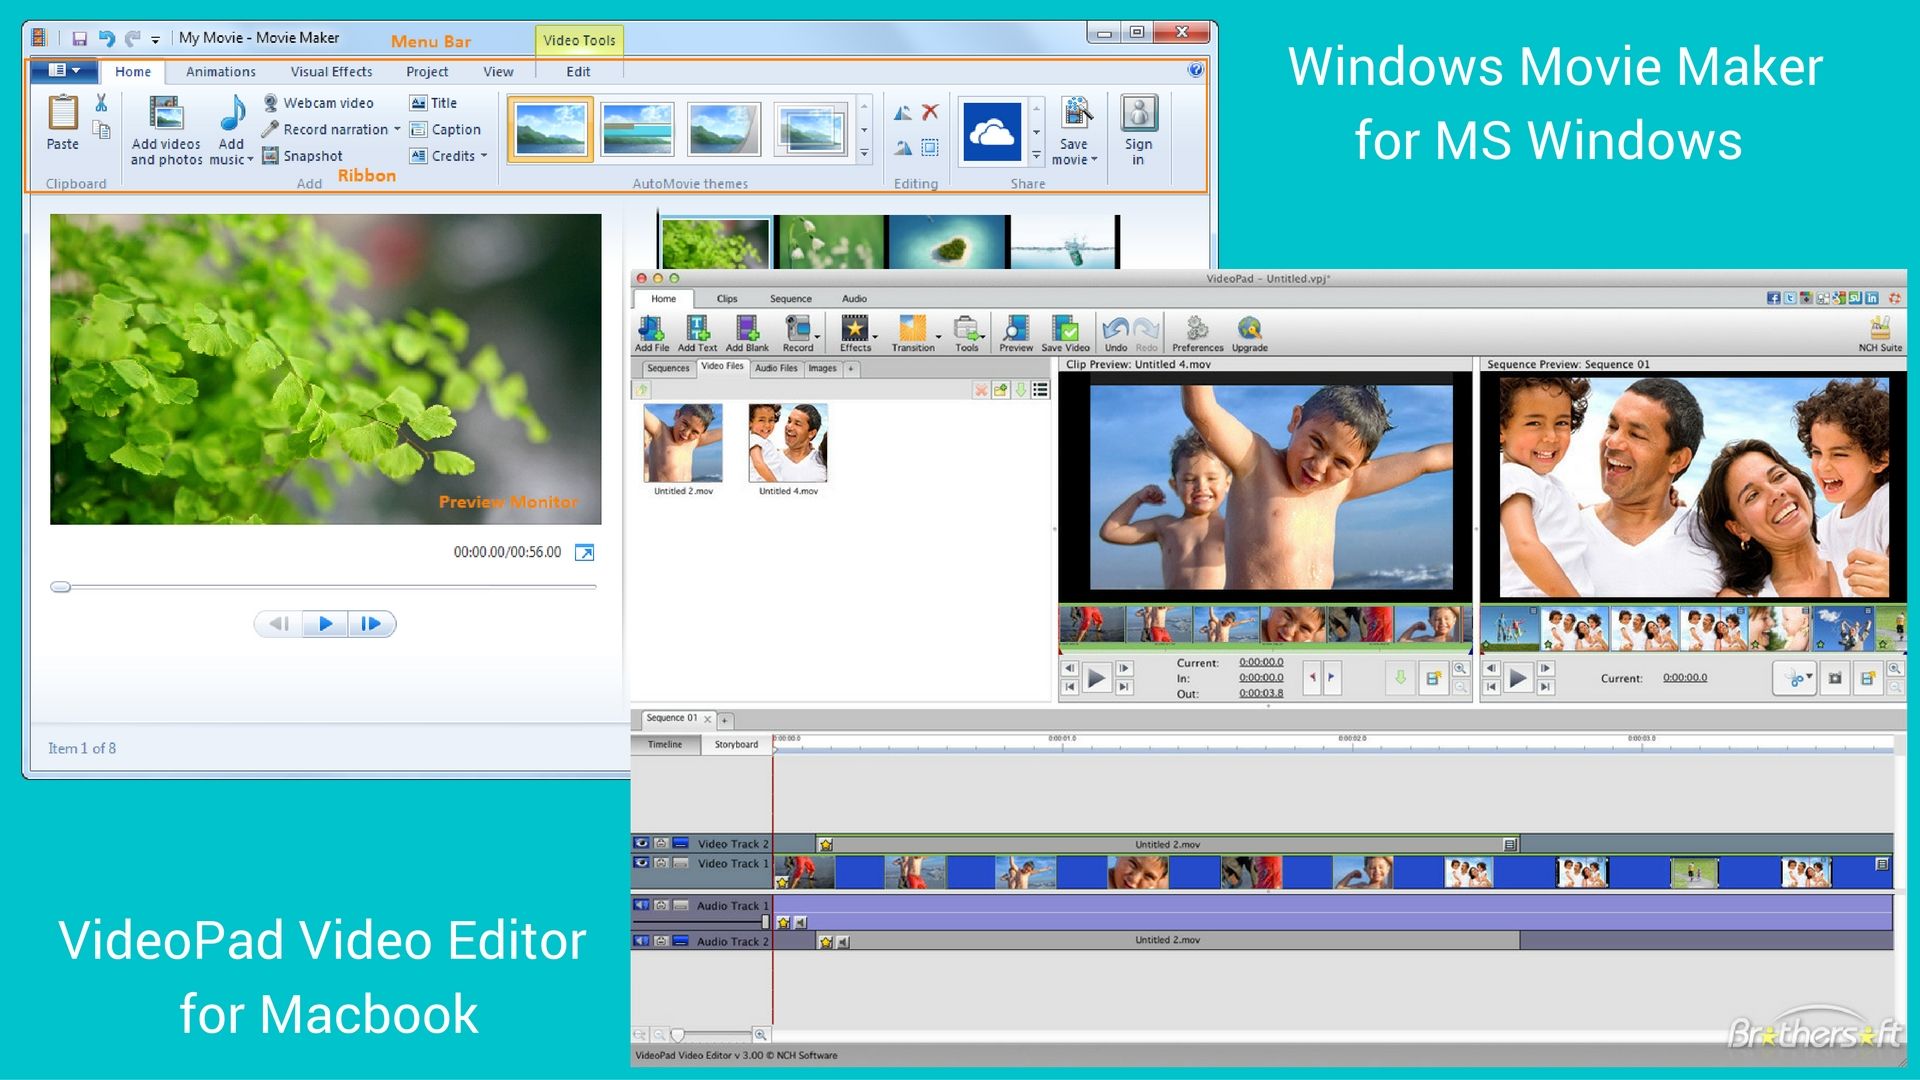 Windows Movie Maker and VideoPad Video Editors can help you stitch videos and music with ease.